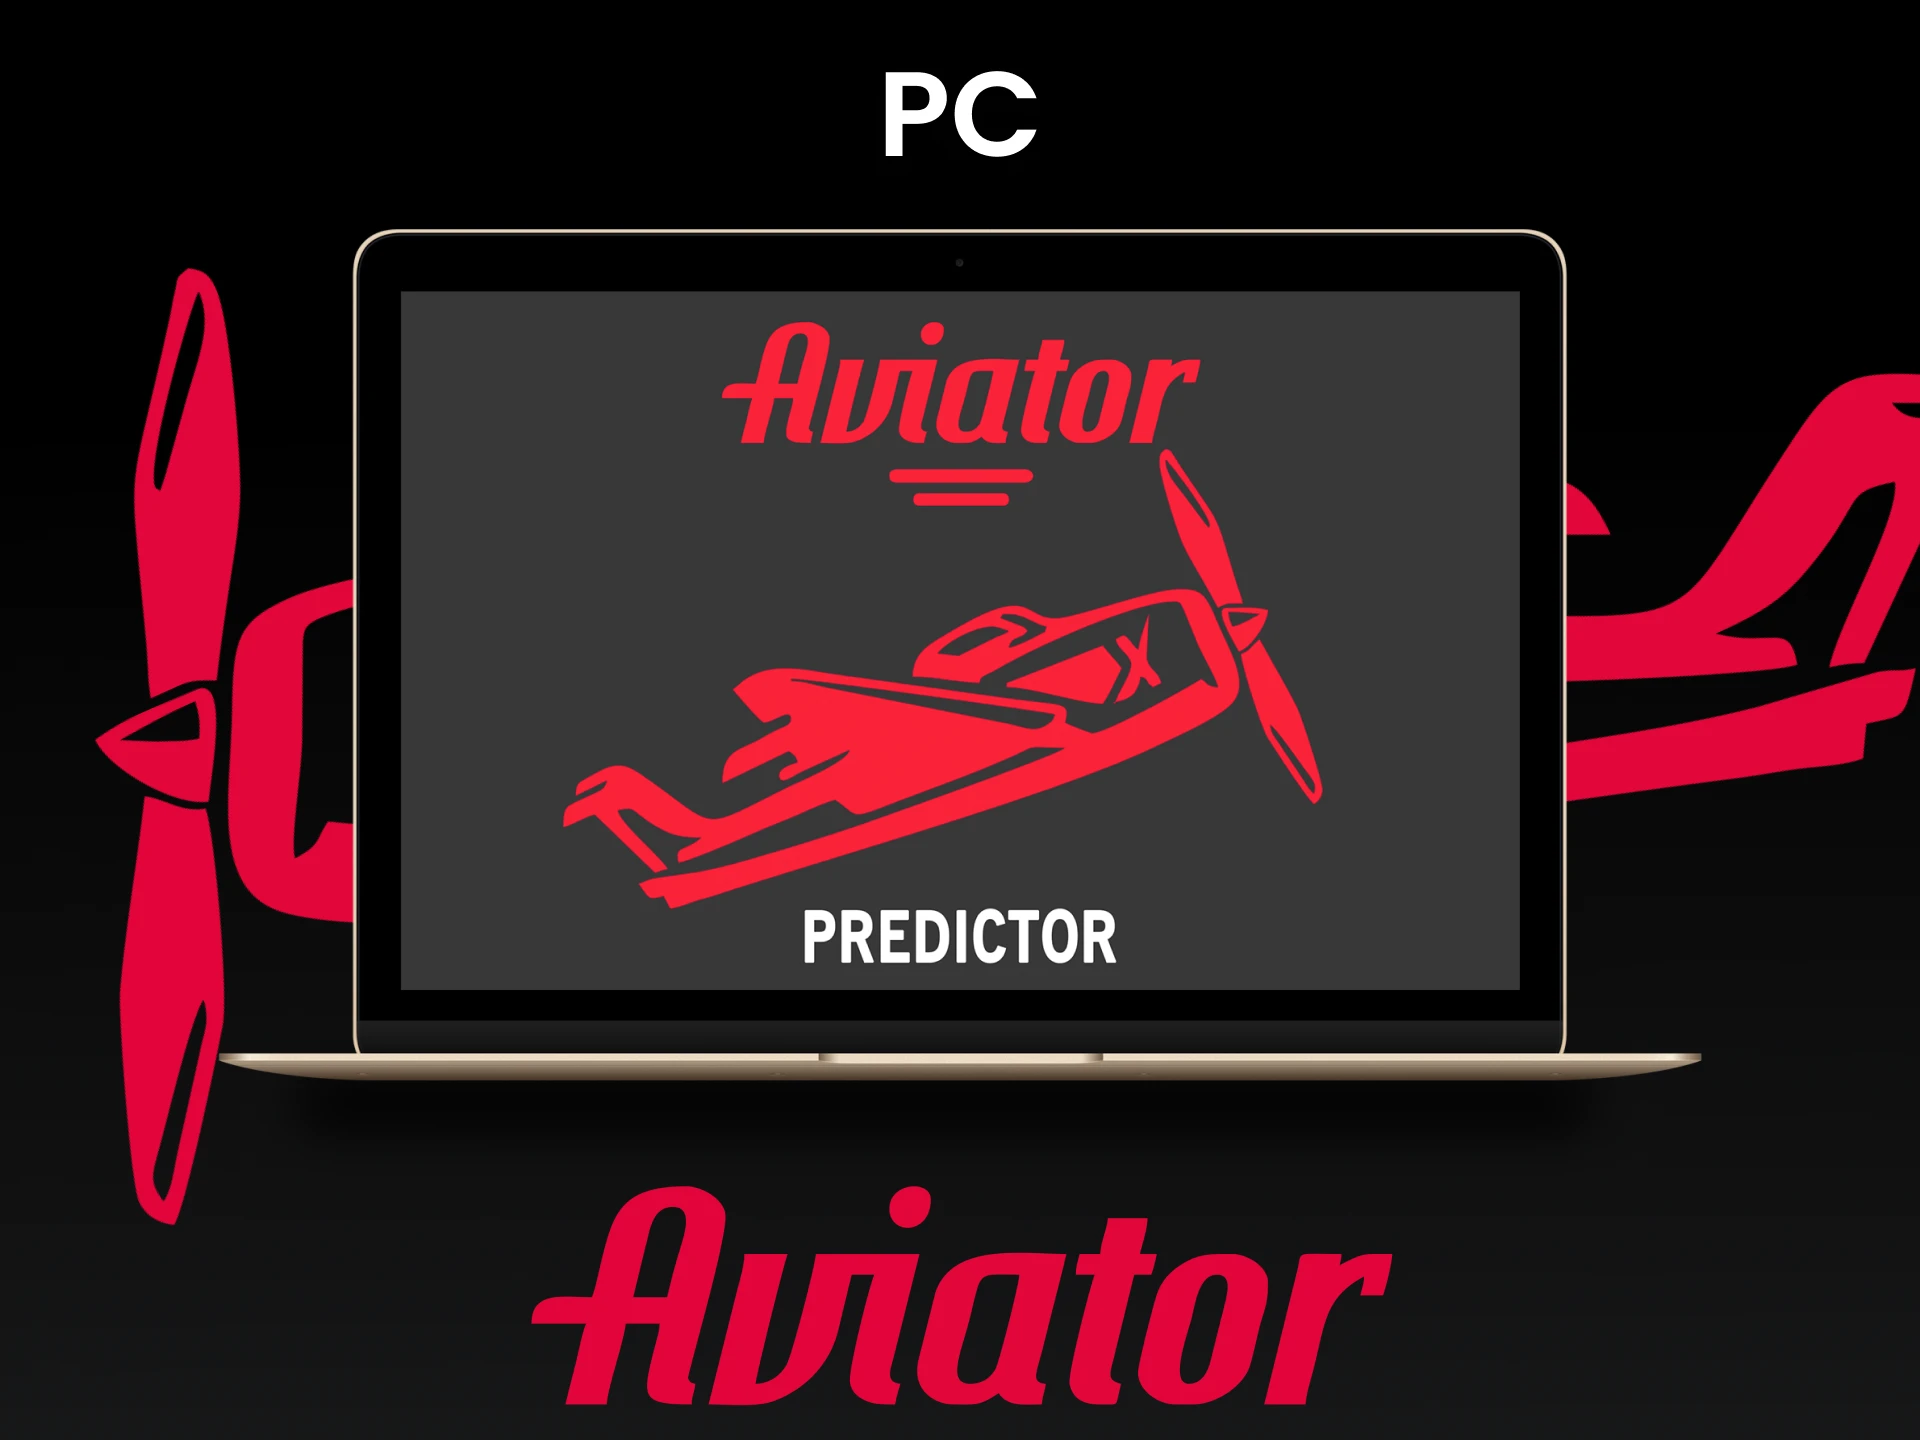 You can use Aviator game software on your computer.